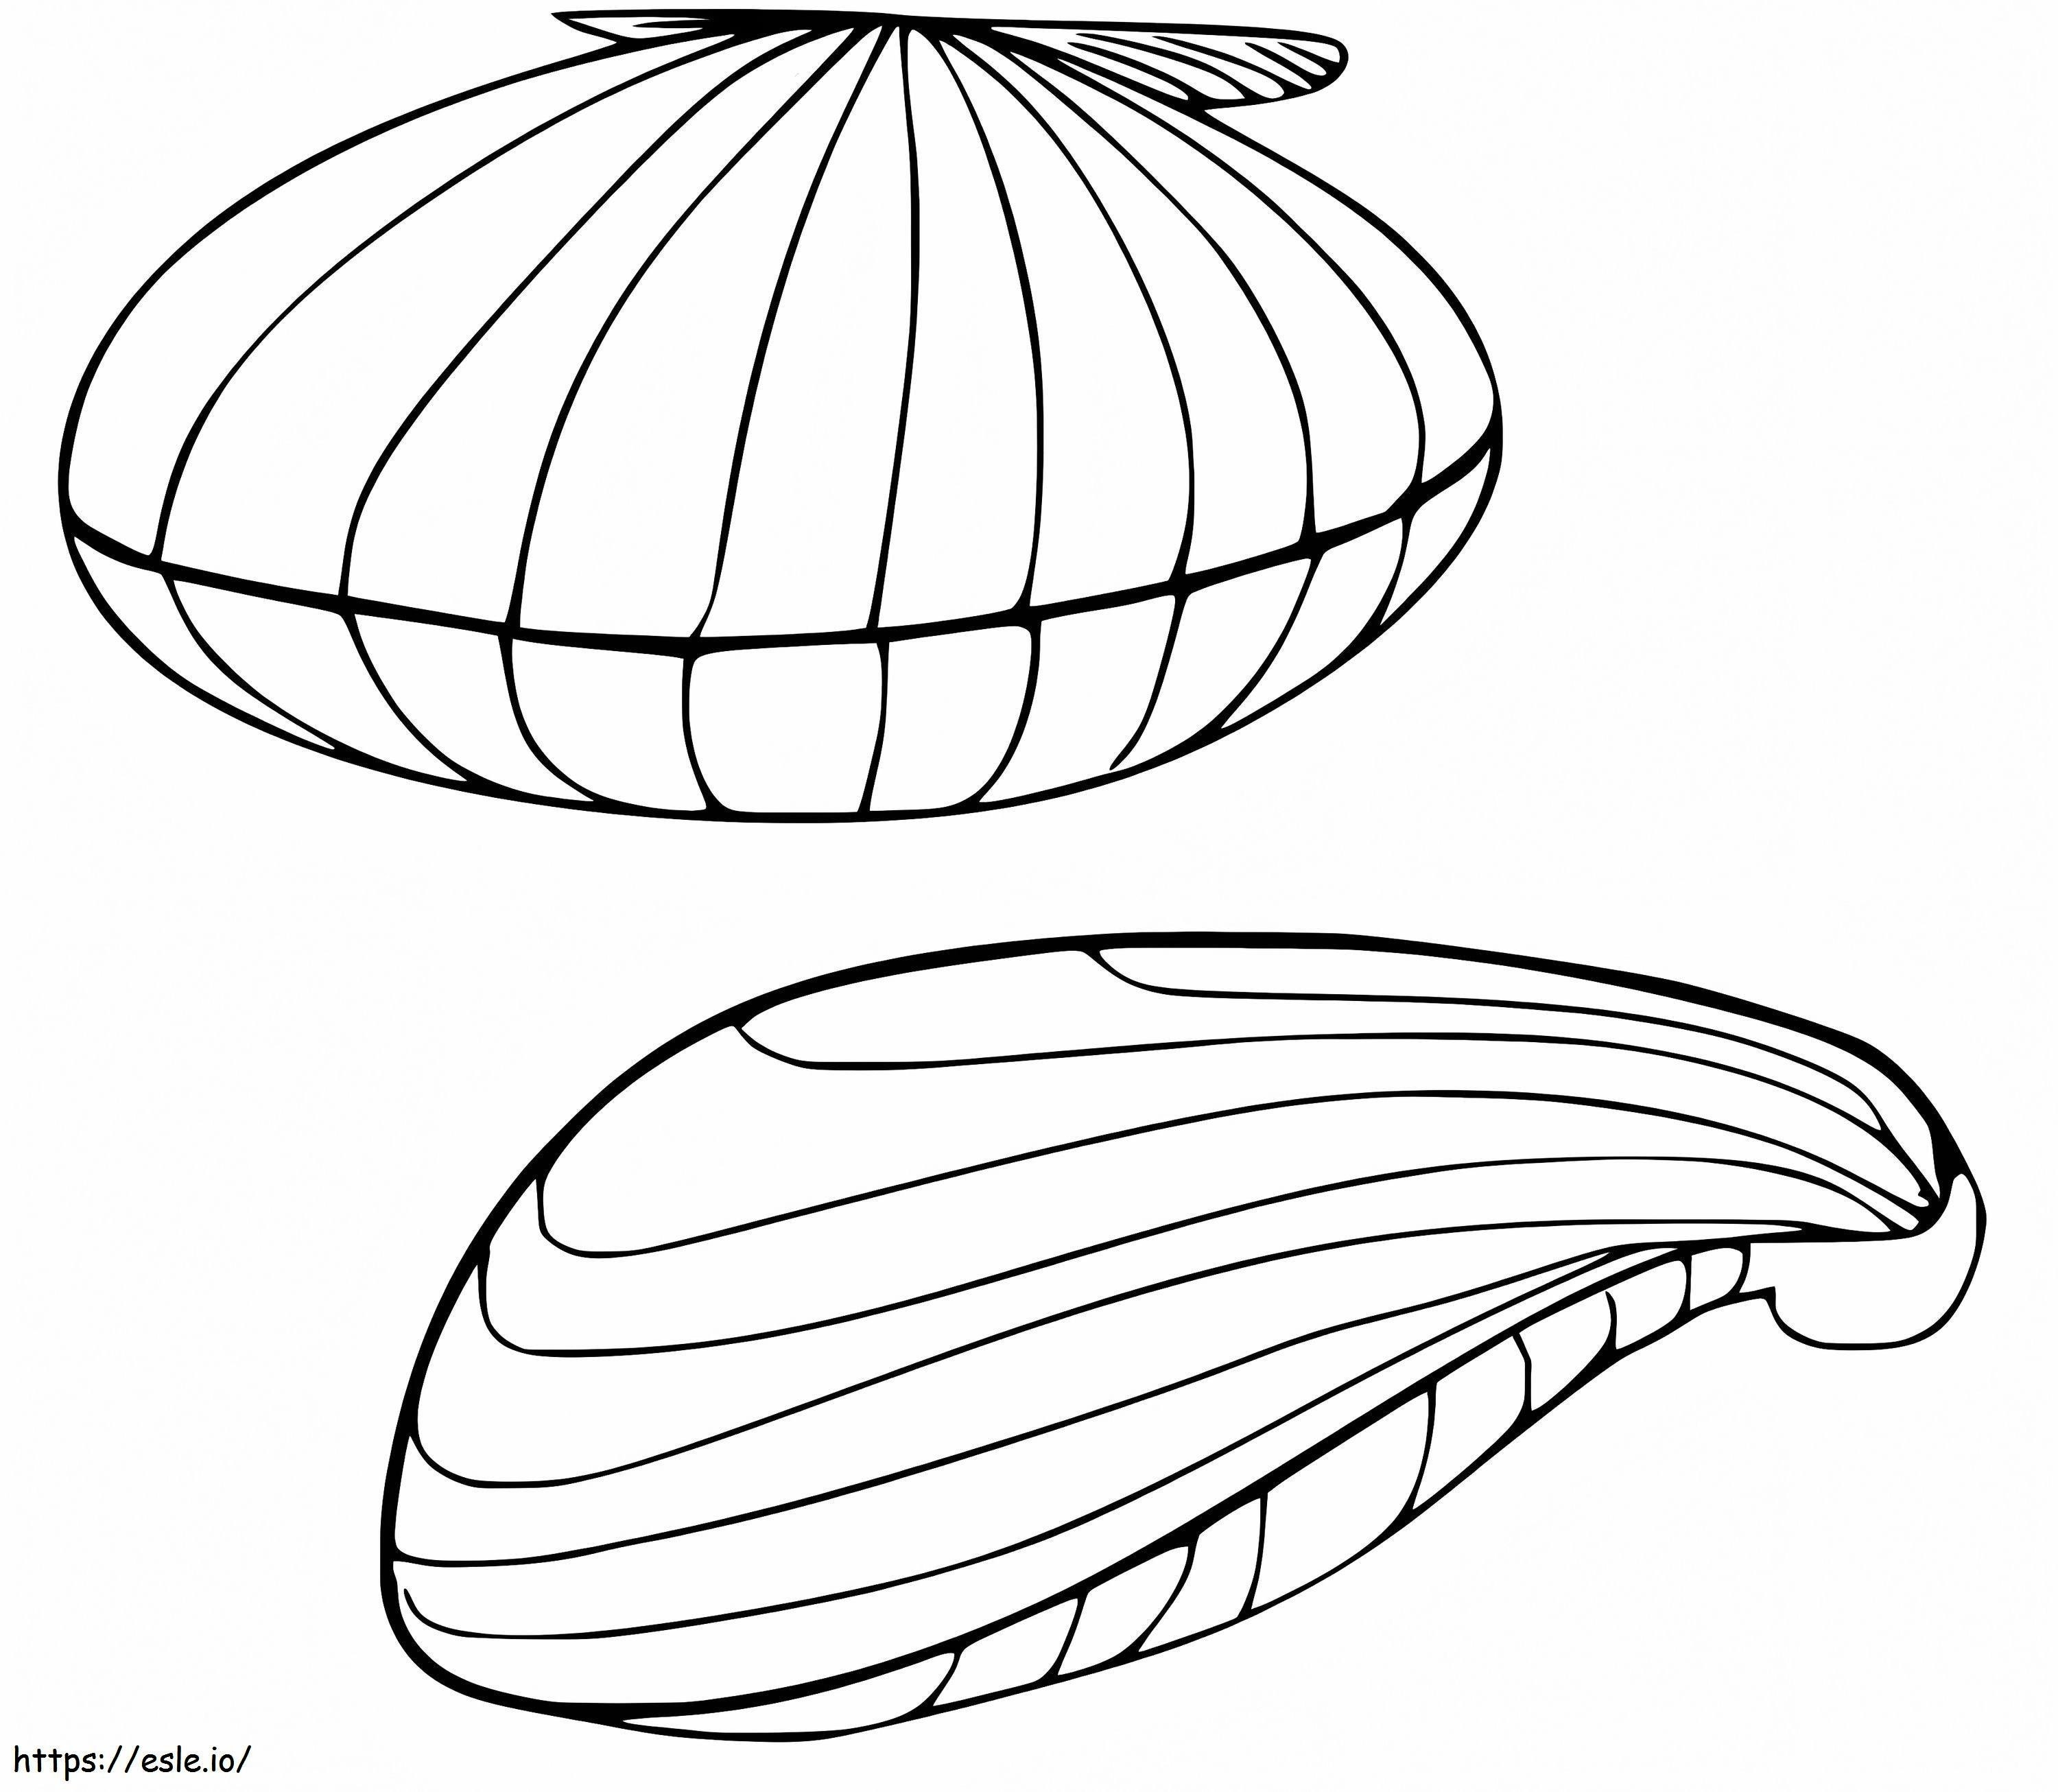 Free Mussels coloring page